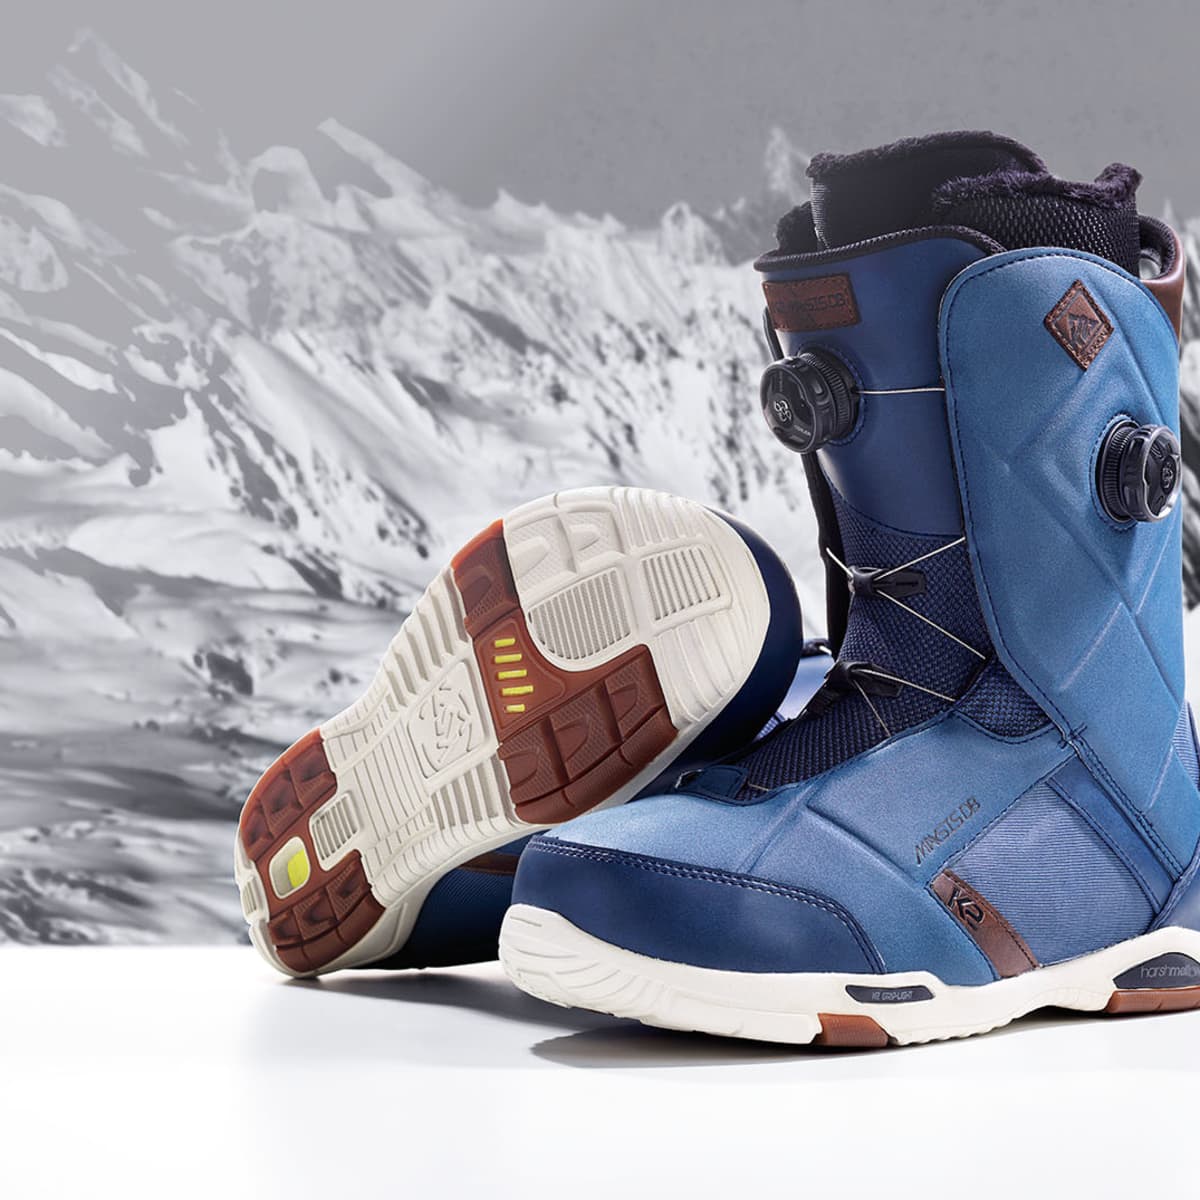 K2 Maysis Boot and the Conda System - Snowboarder